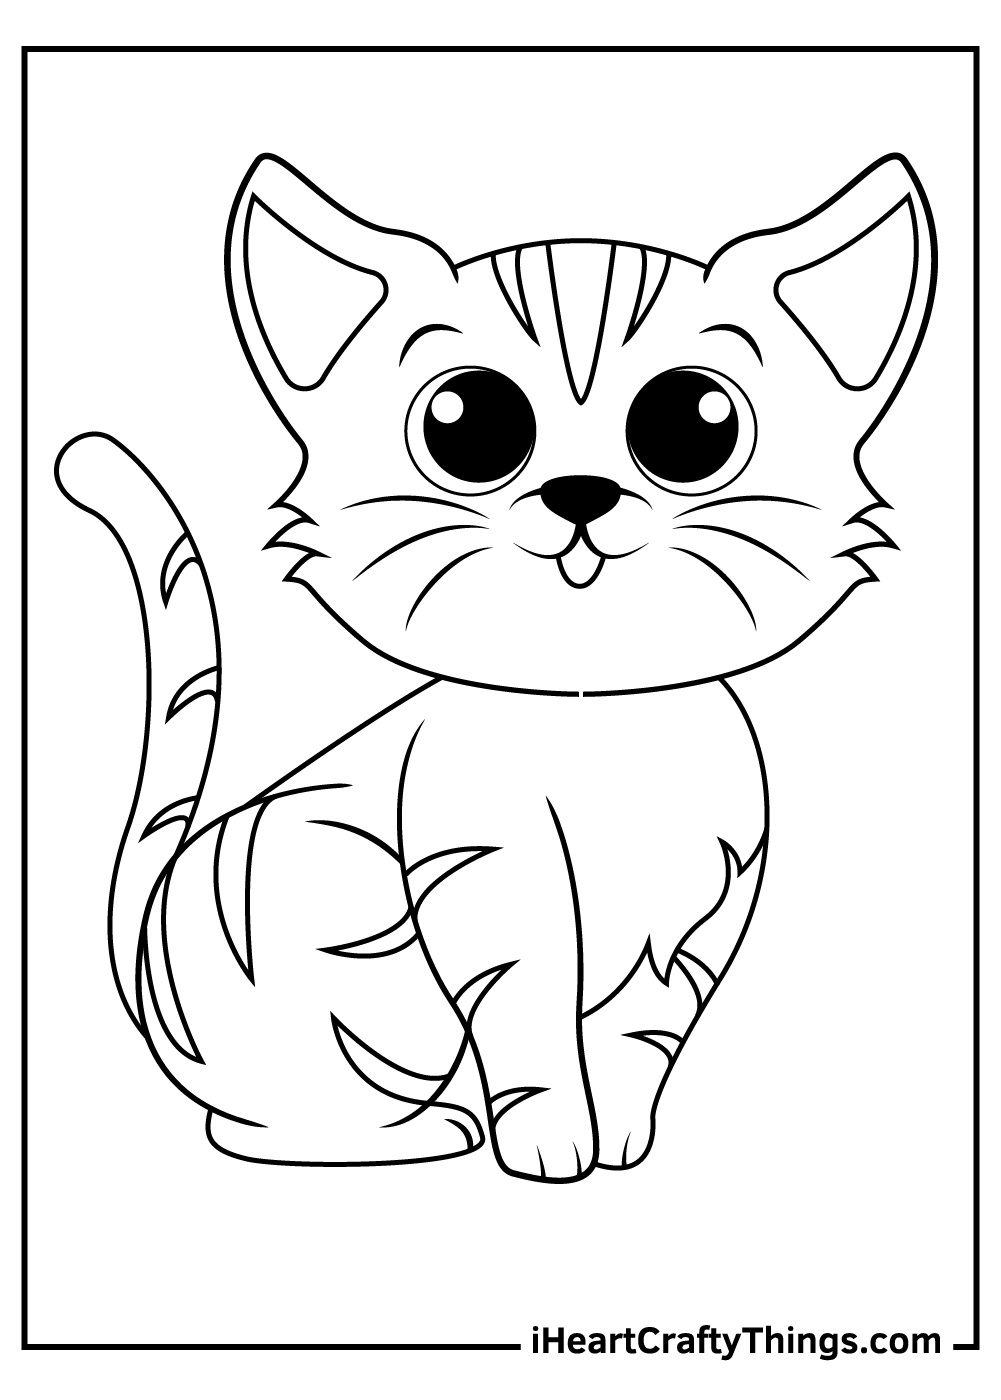 Cute Kitten Coloring Pages (Updated 2021)